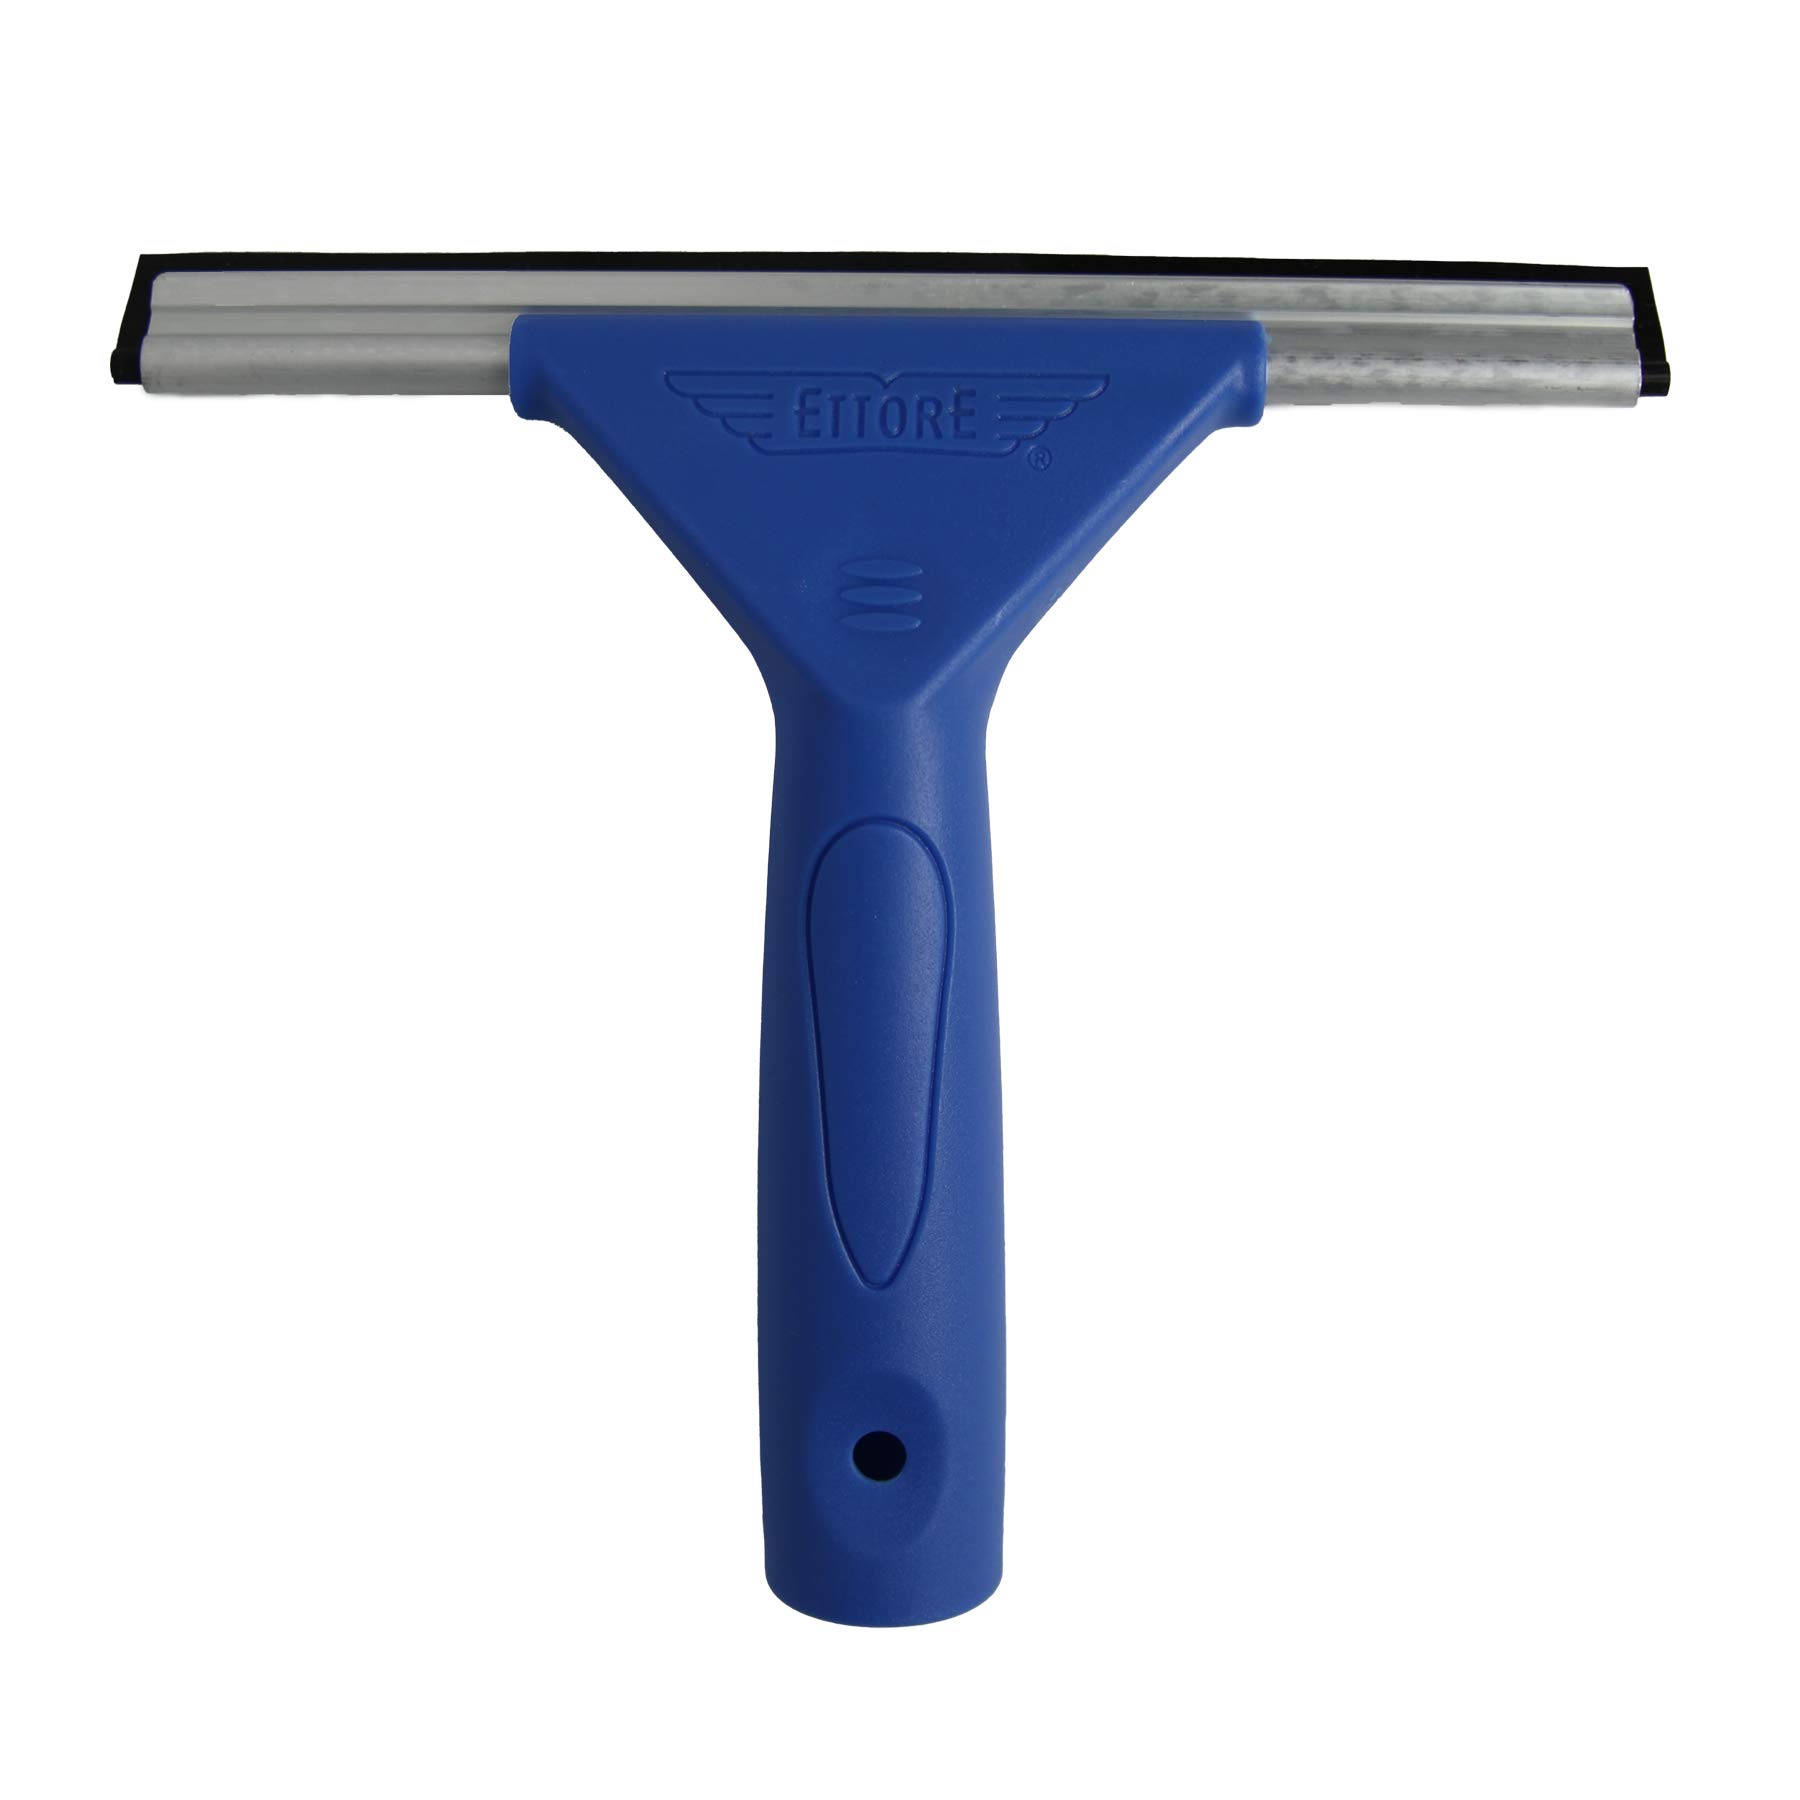 $5.15: Ettore-17008 8-Inch All Purpose Window Squeegee with Lifetime Silicone Rubber Blade, Blue @Amazon